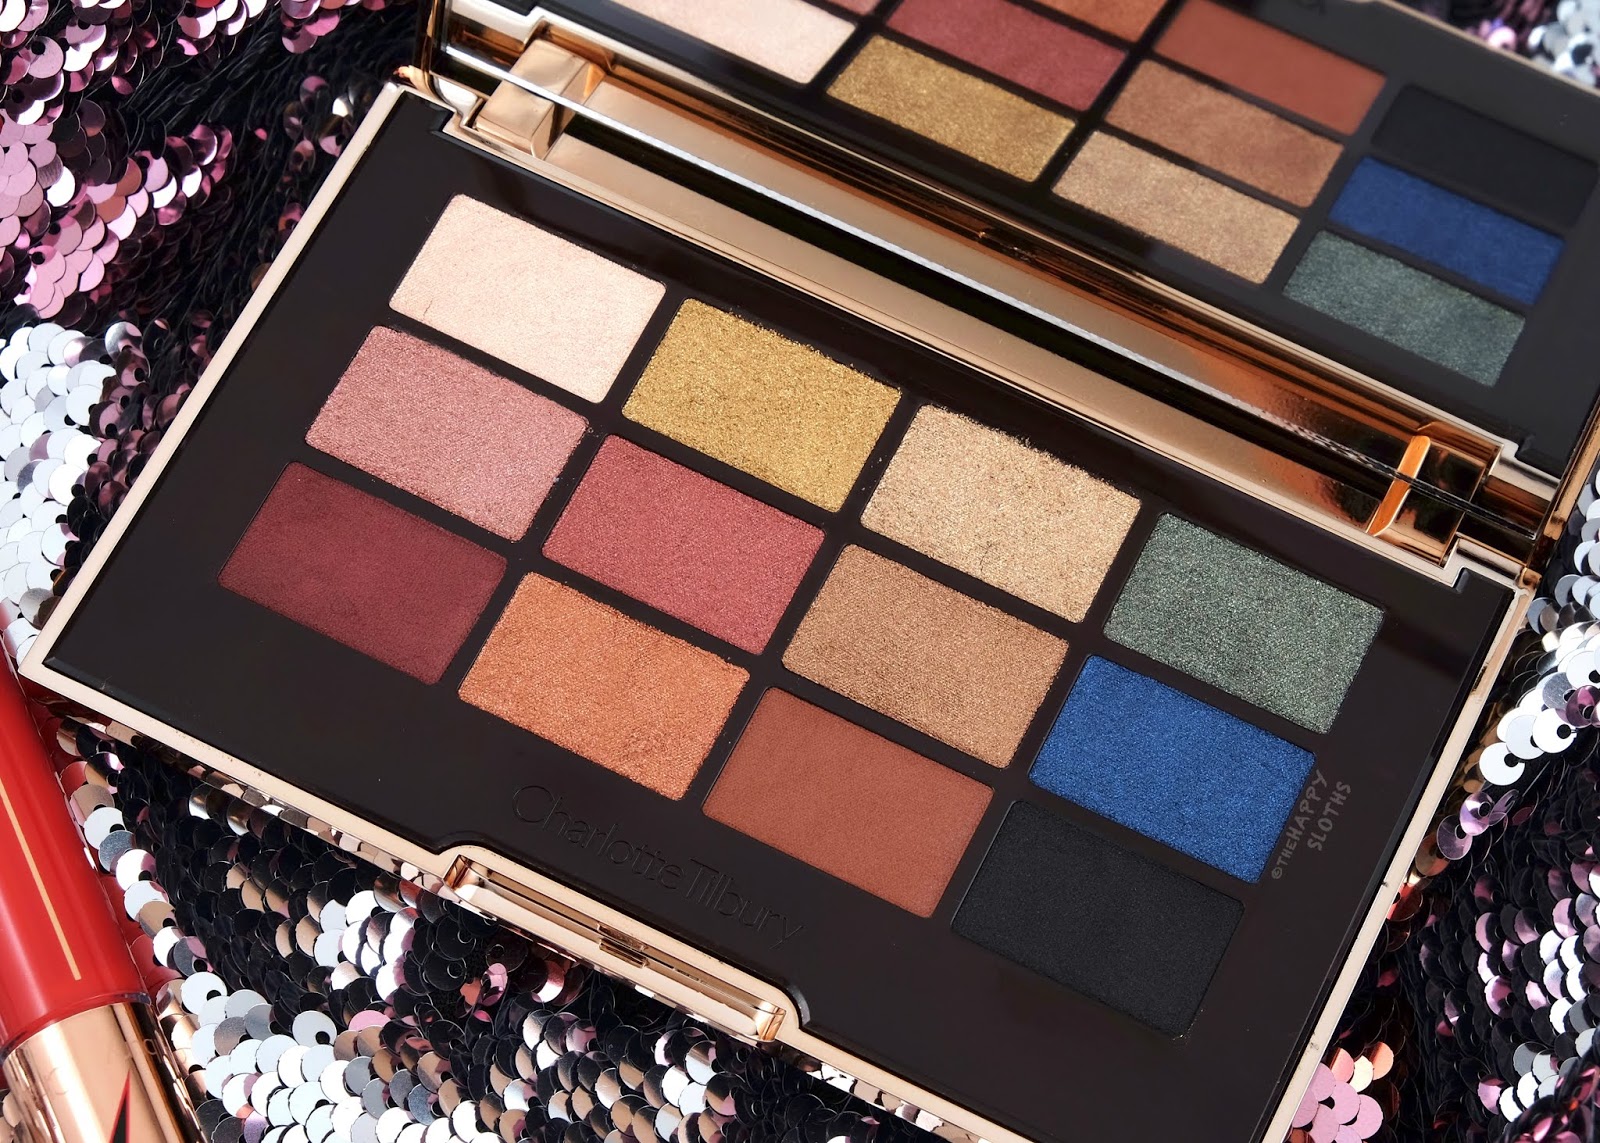 Charlotte Tilbury | The Icon Eyeshadow Palette: Review and Swatches